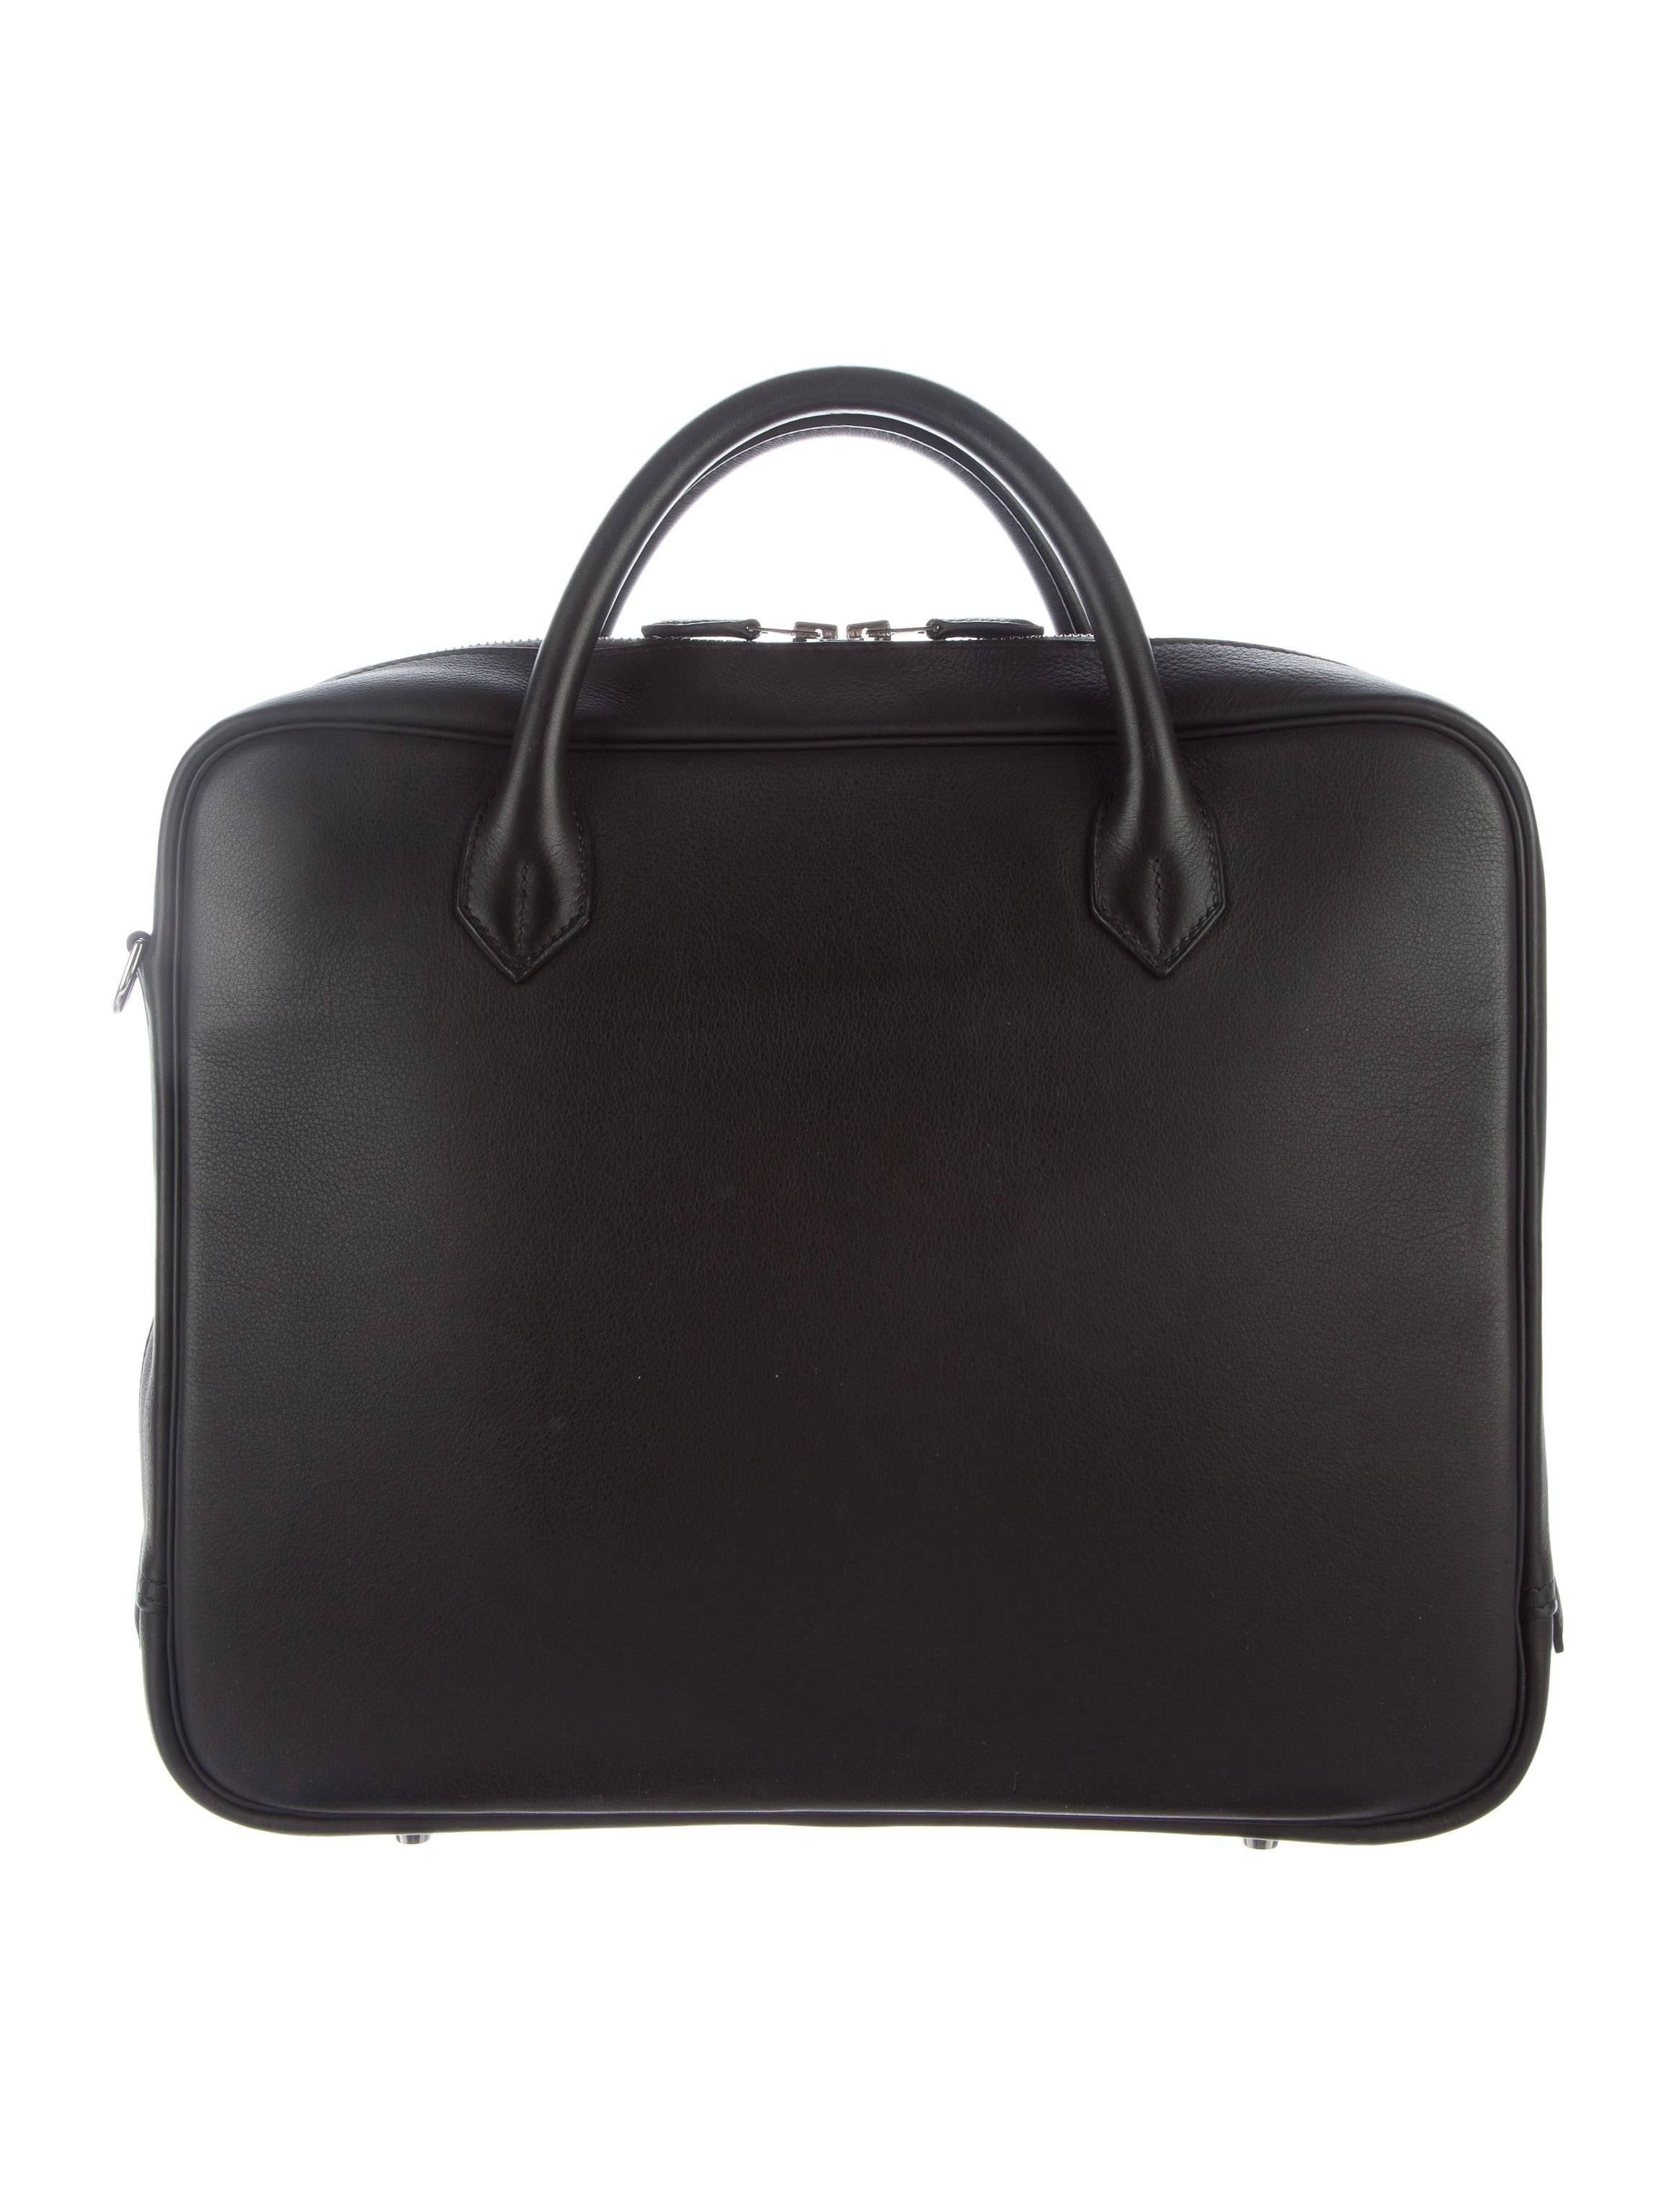 Hermes New Black Leather Men's Women's Top Handle Business Travel  Tote Shoulder Bag

Original purchase price $8,995
Leather
Palladium hardware
Woven lining
Zipper closure
Made in France
Date code Square R
Handle drop 4"
Removable shoulder